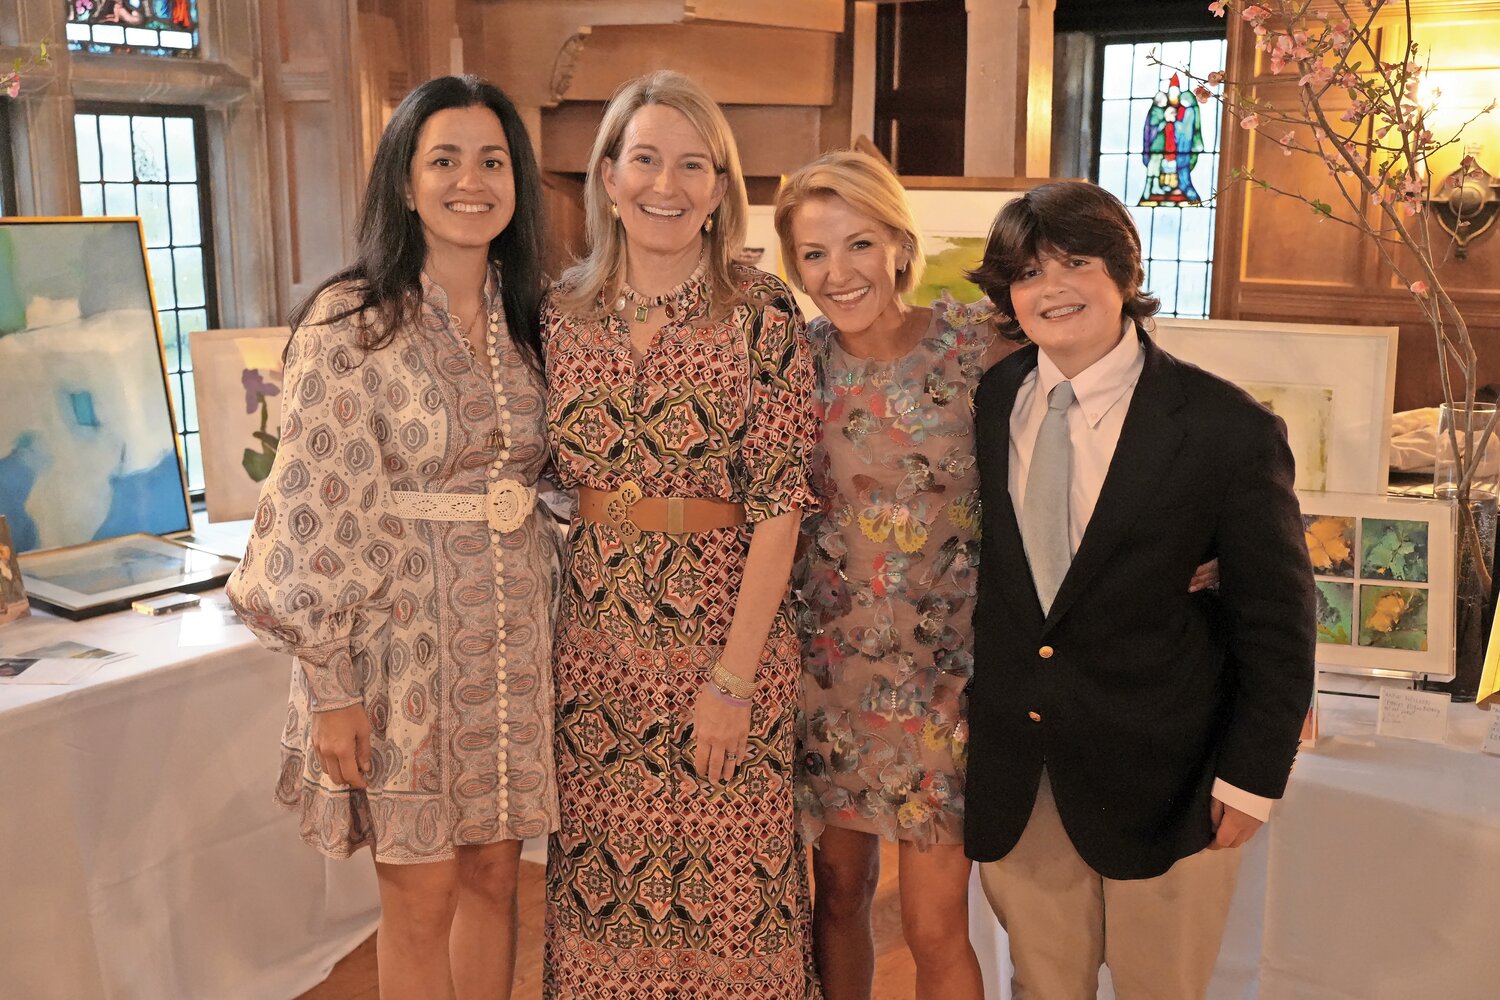 Christina Potter, far left, artist Anne Neilson, Kate Doerge and her son, Frankie Doerge, at Angels & Art For a Cause on April 19 at St. John’s in Lattingtown. The fundraiser supported Penny’s Flight, a foundation that raises awareness of neurofibromatosis, and helps fund research into a cure.